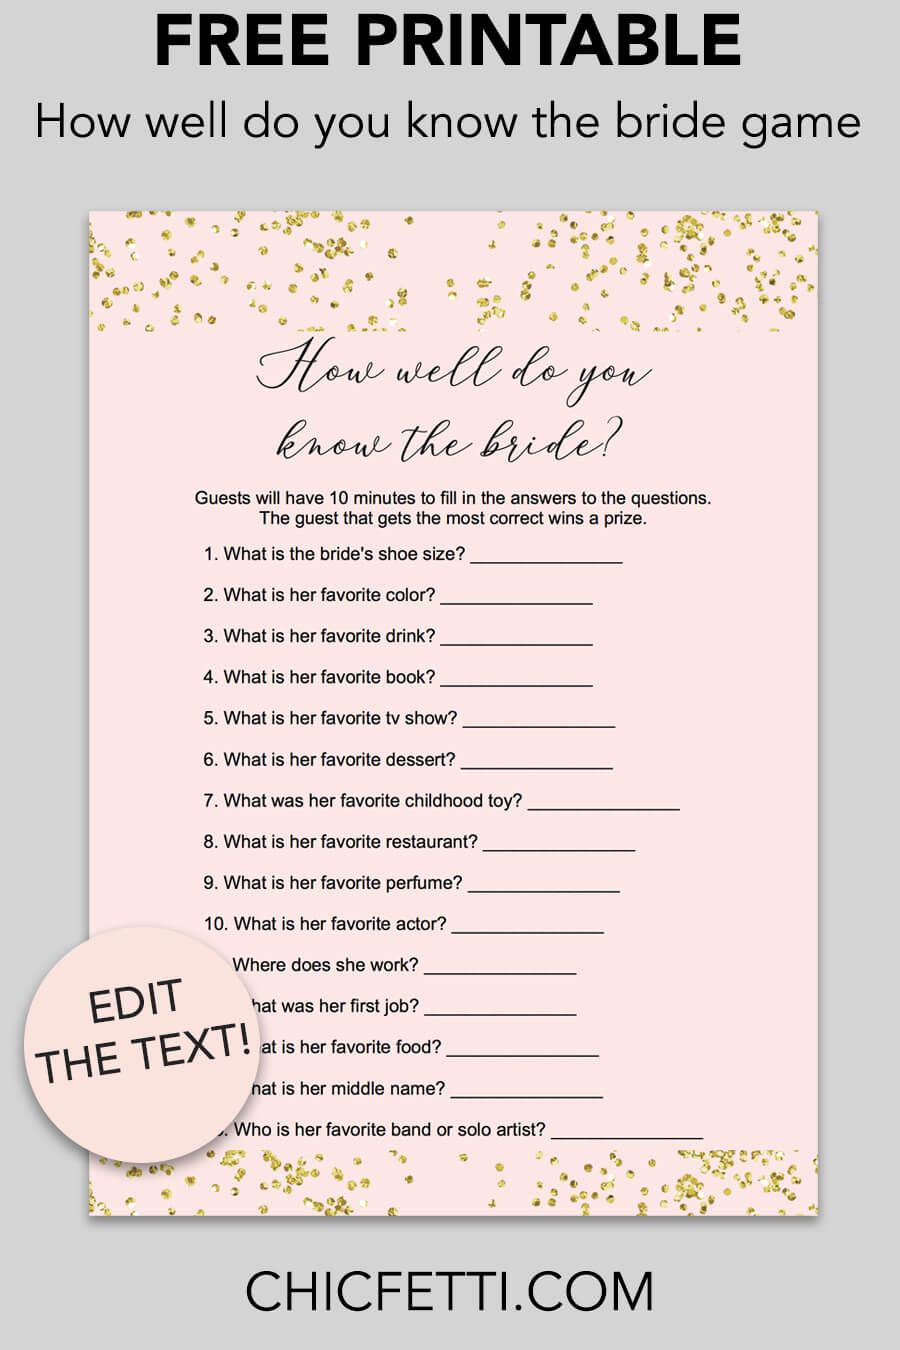 Free Printable How Well Do You Know The Bride Game Cards - Download - How Well Do You Know The Bride Free Printable